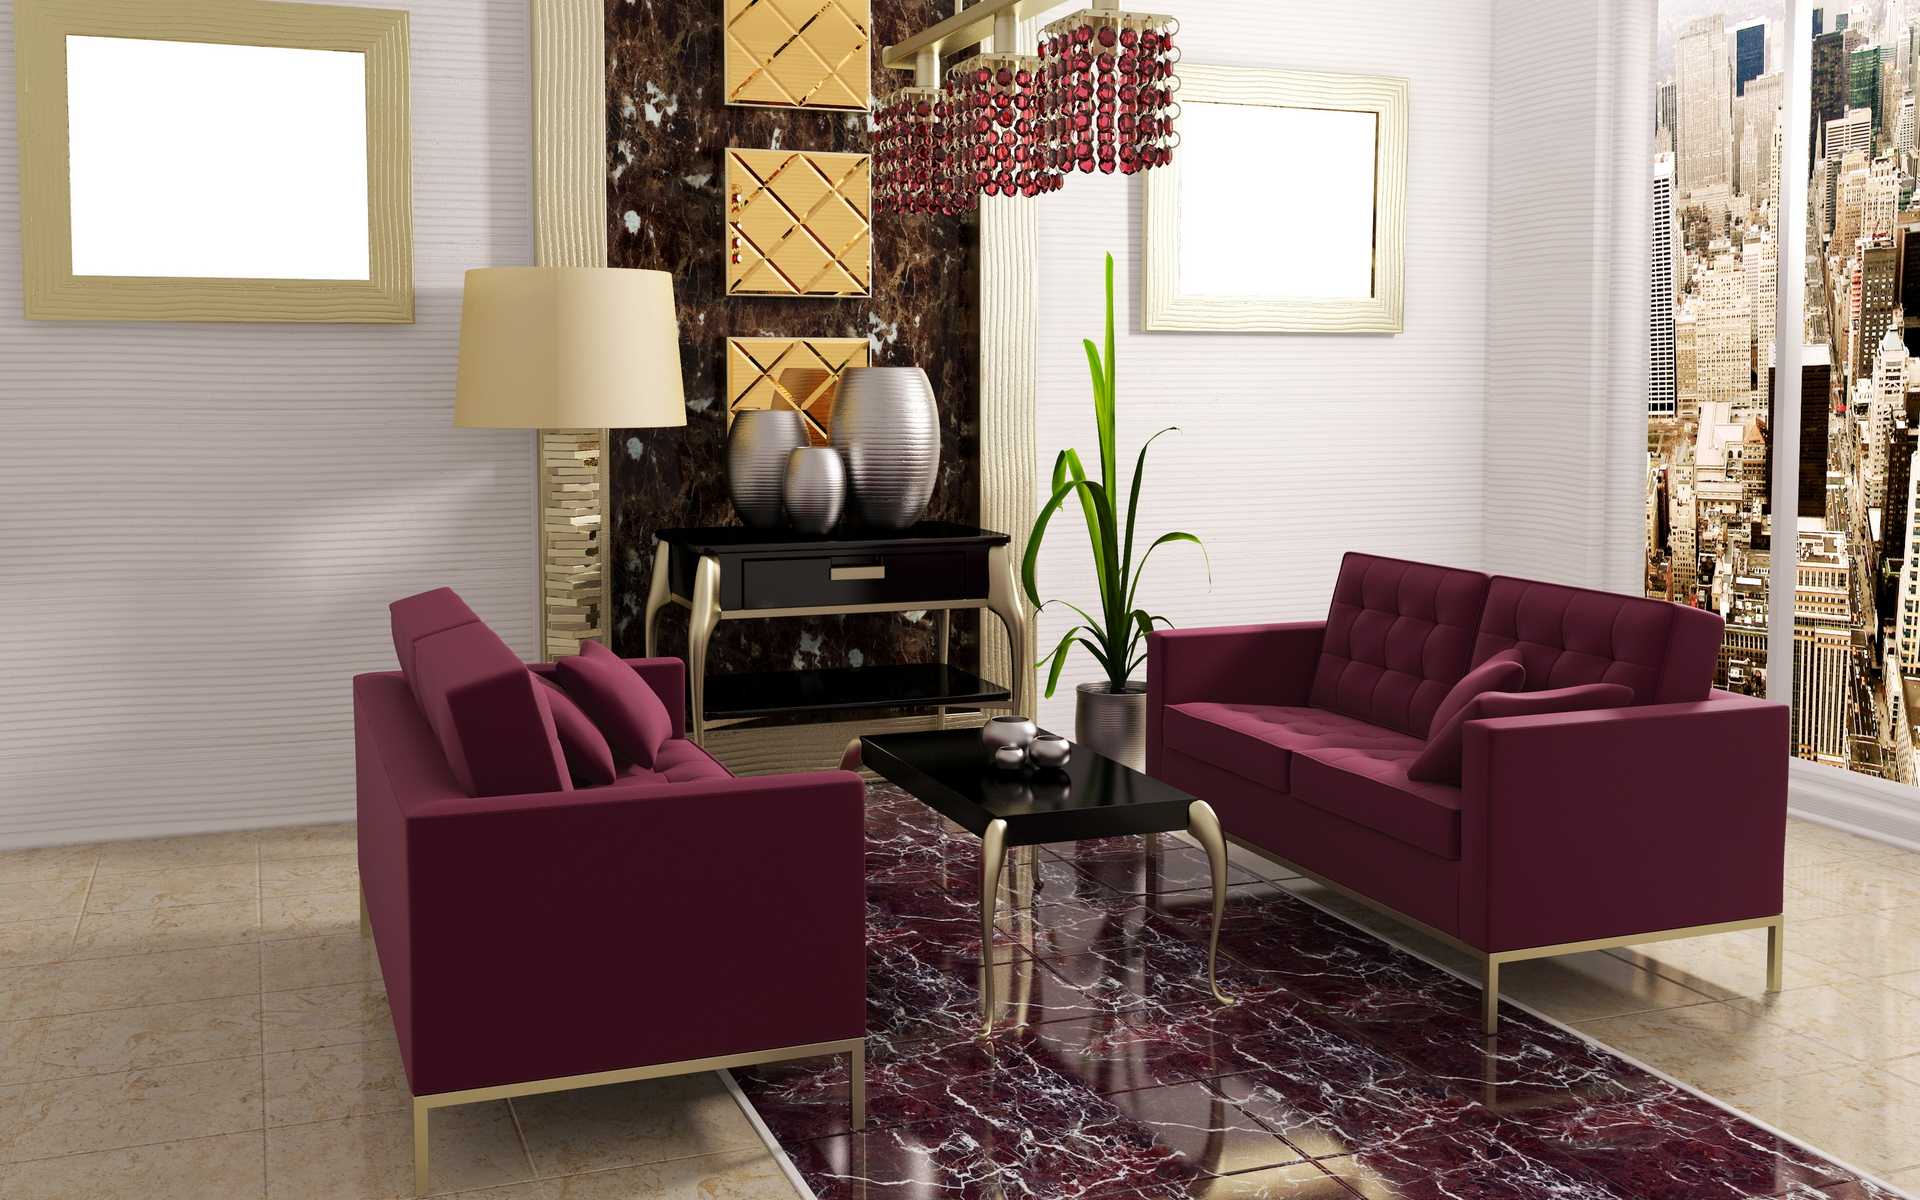 beautiful burgundy color in the style of the hallway